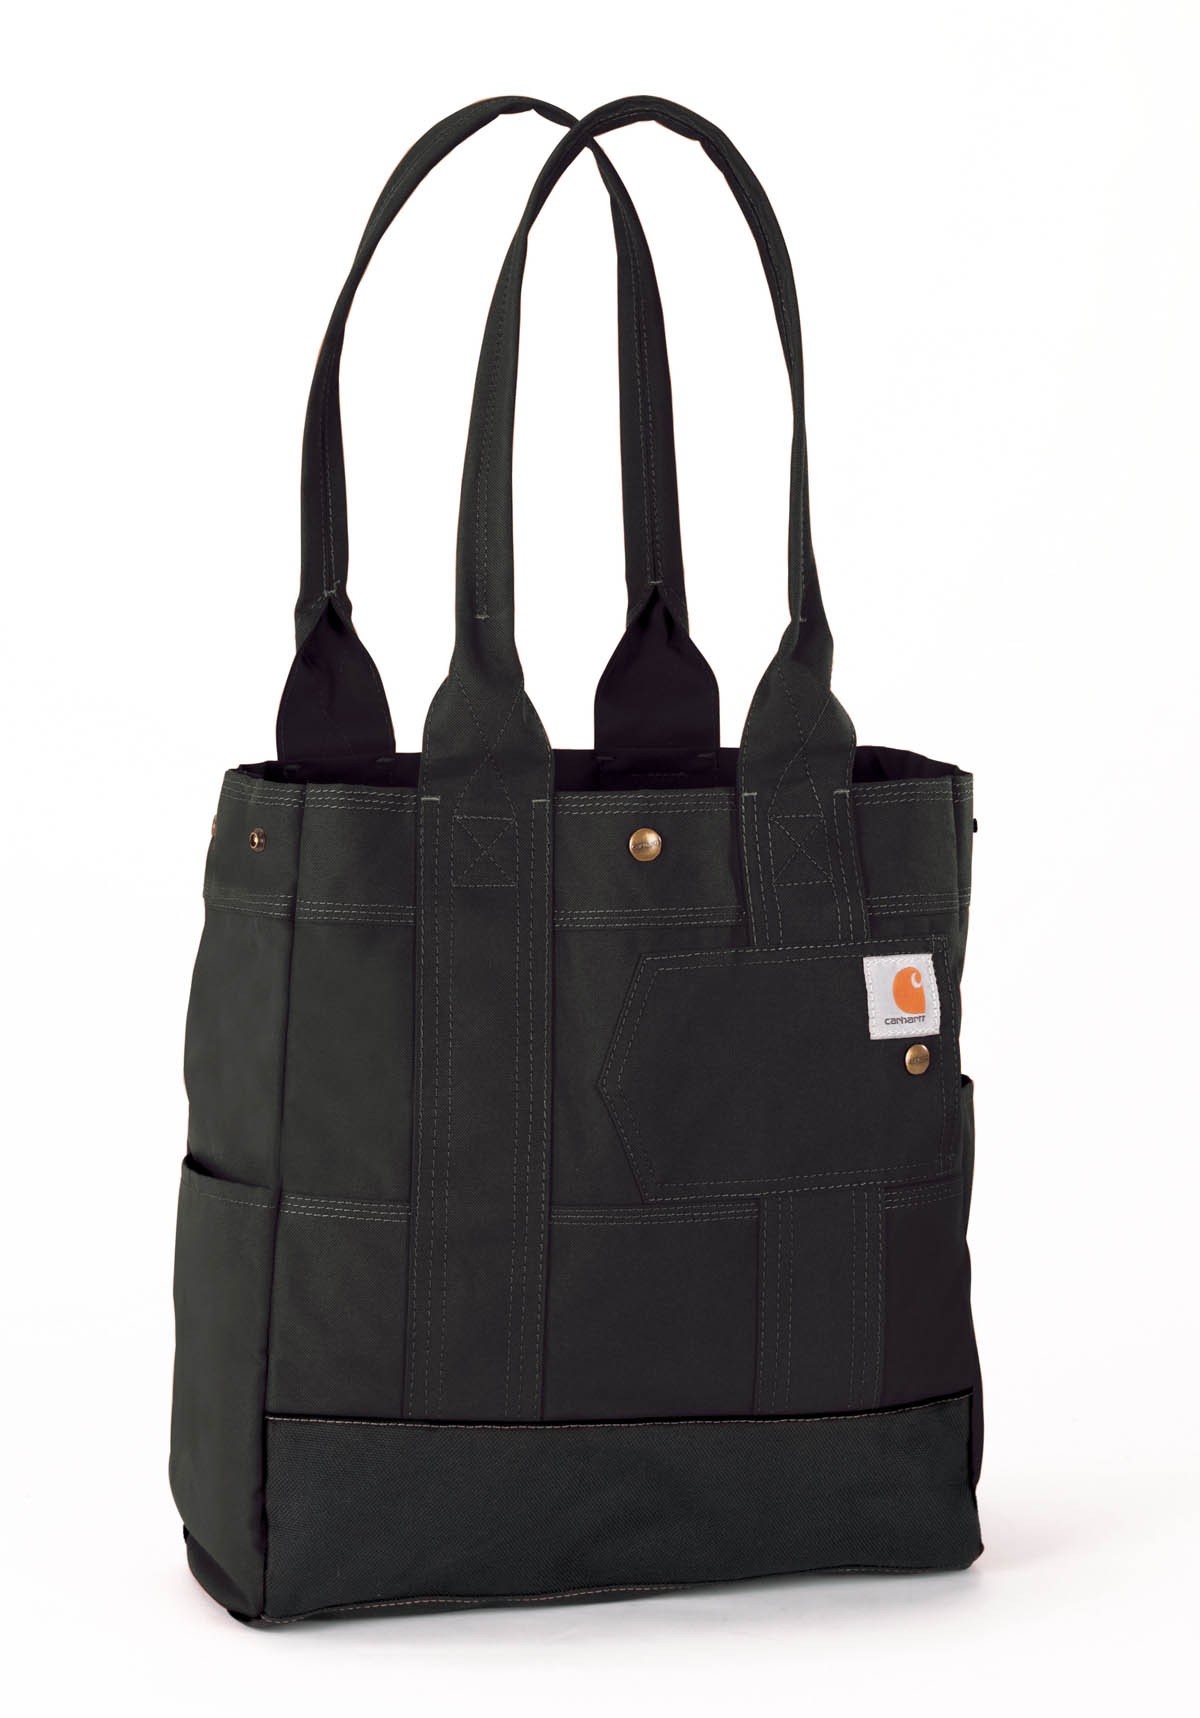 Carhartt Womens North South Tote